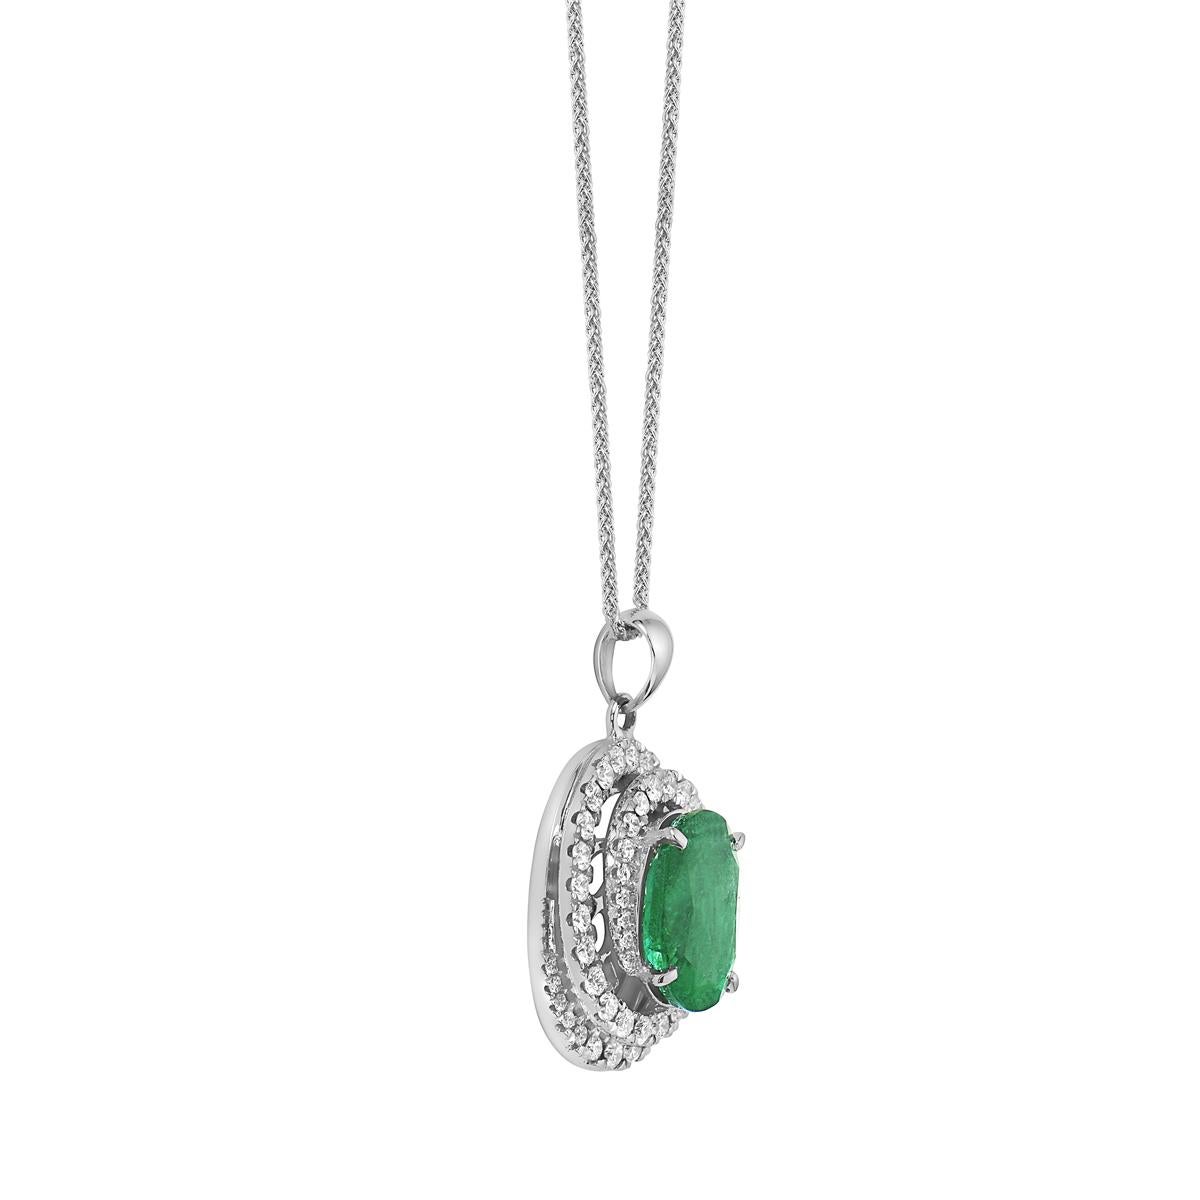 This beautiful pendant has a 3.04 CT oval emerald is surrounded by a diamond spiral halo made of 54, 0.74 CT round diamonds. It is made of 4.9 grams of 18 karat white gold and hung from an 18 karat white gold wheat chain that can be worn at 16, 17,